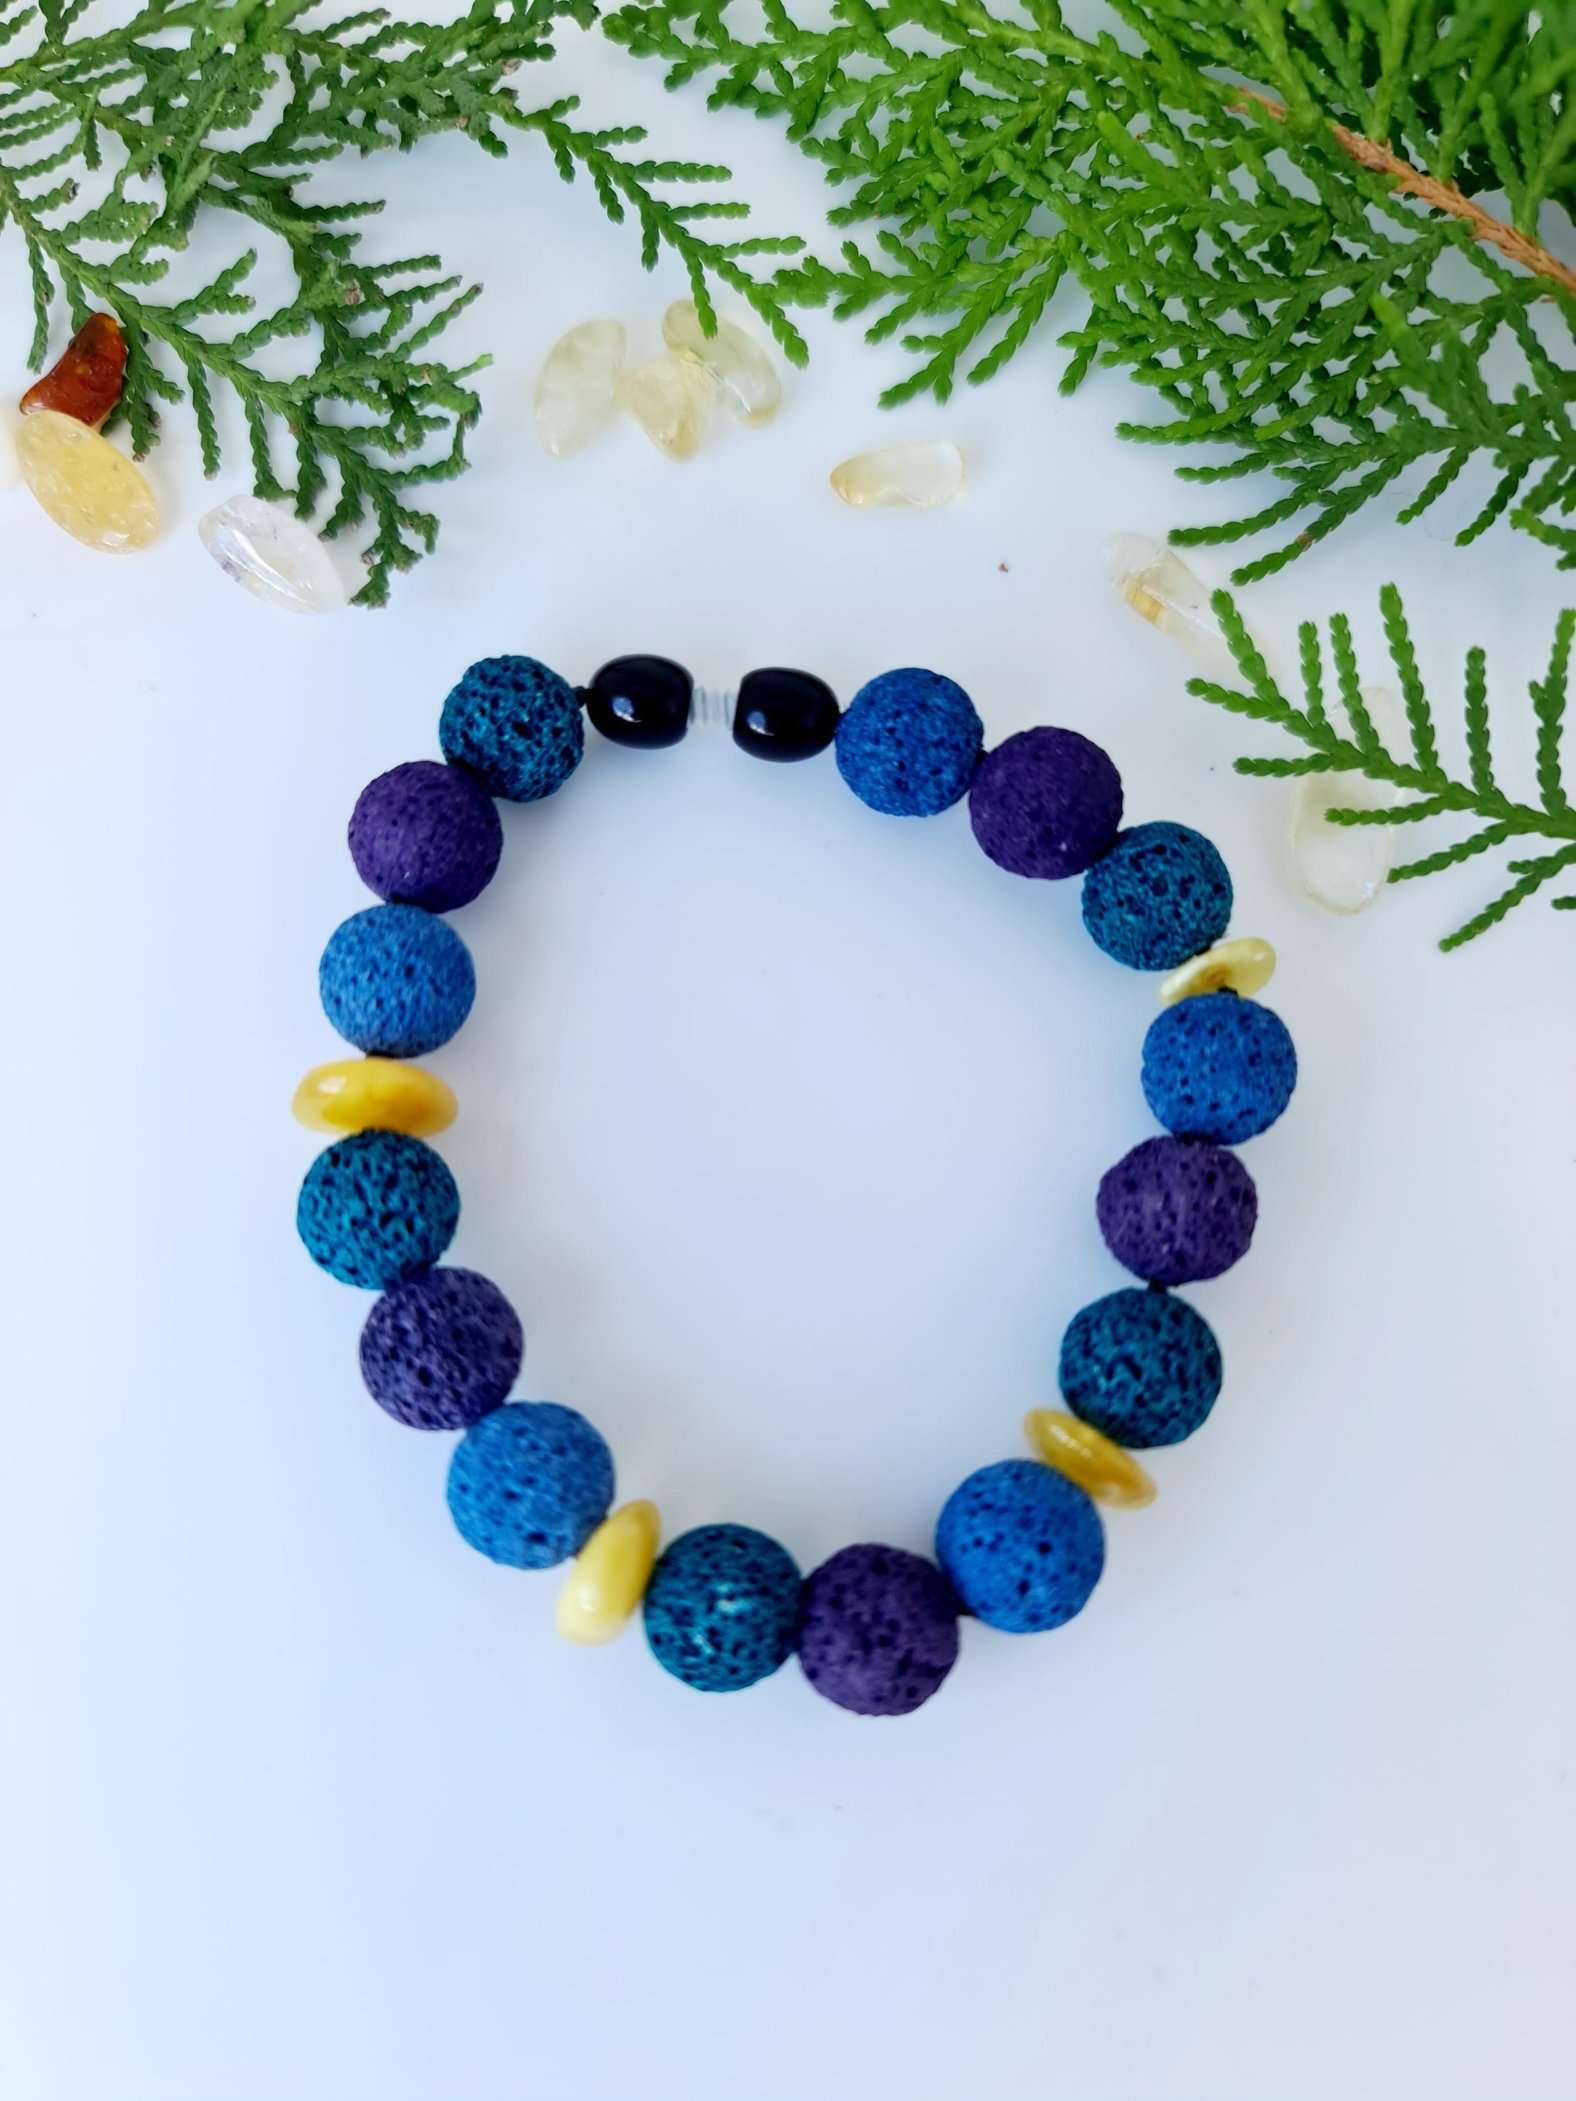 Blue and Purple Dye Lava Beads with Butterscotch Amber Bracelet/Anklet - 20 cm